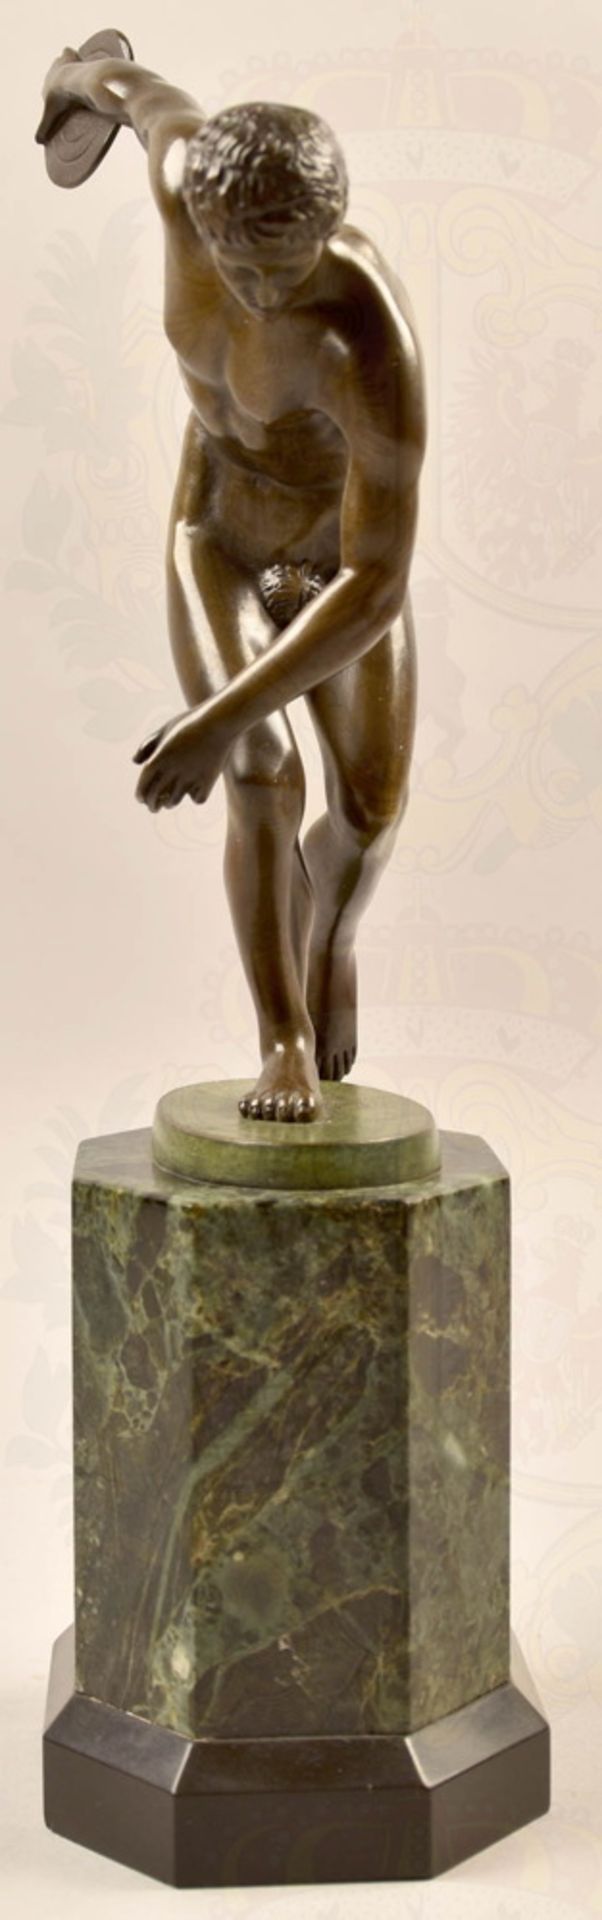 Bronze statuette Discus Thrower about 1935 - Image 2 of 6